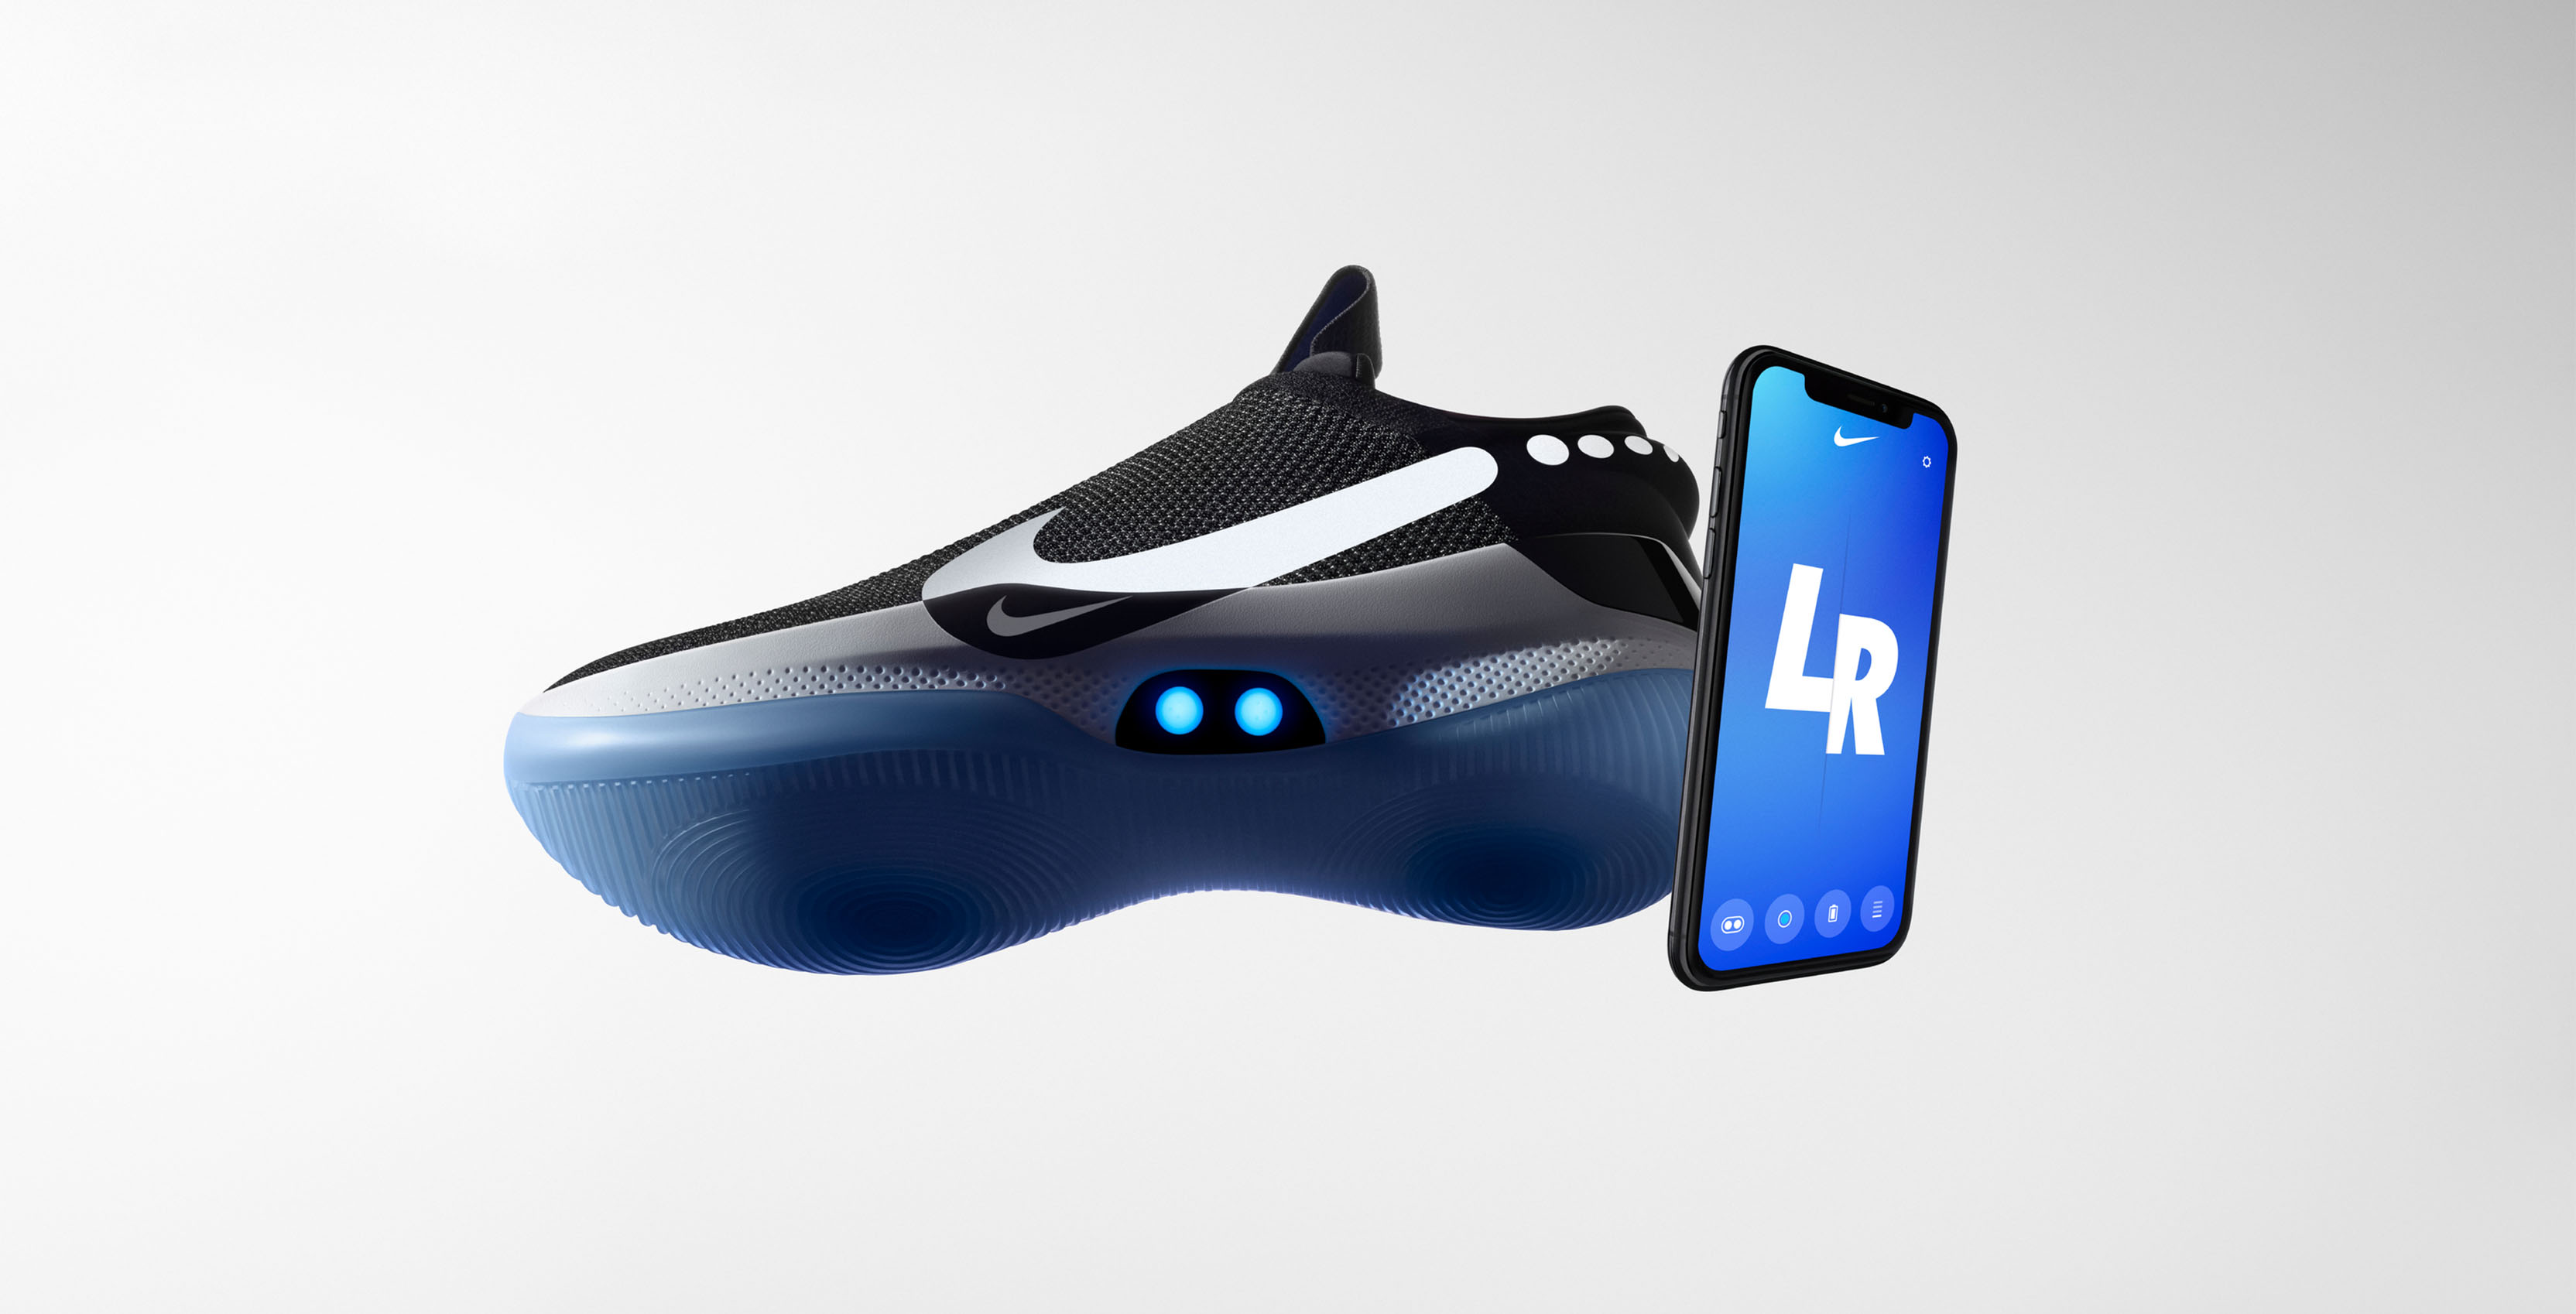 Nike unveils Adapt BB self-lacing shoes 